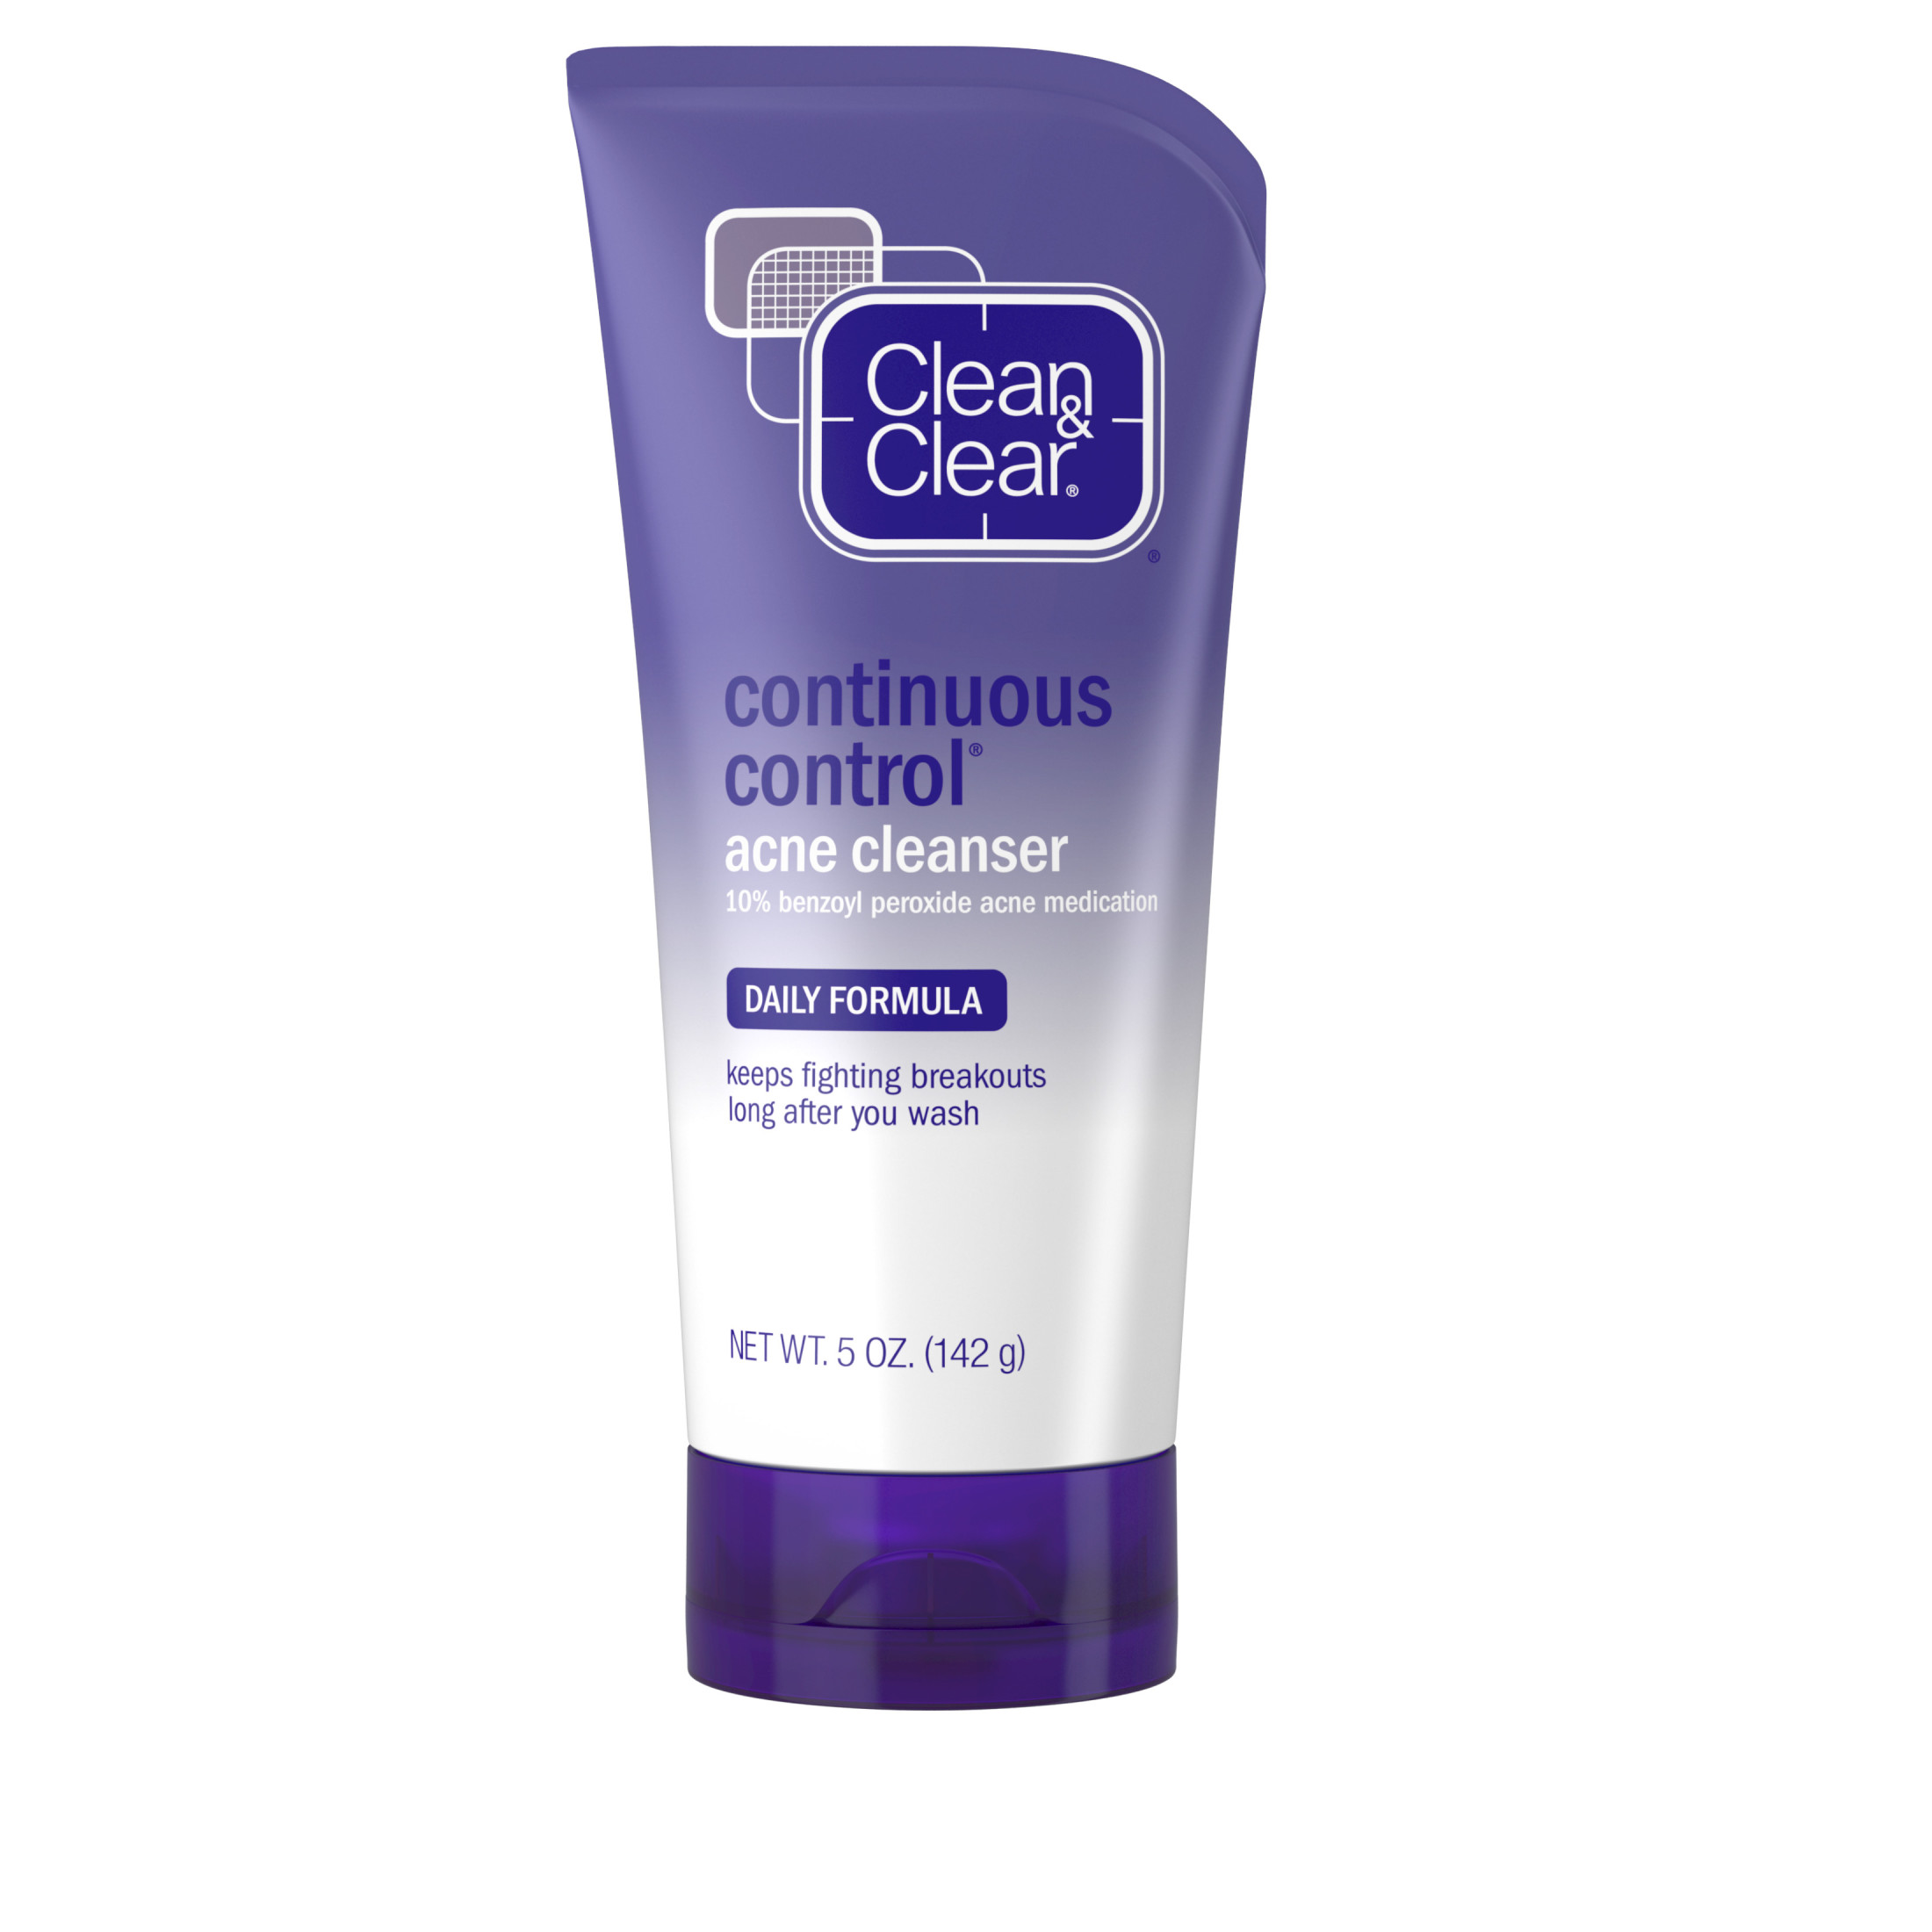 Clean & Clear Continuous Control Benzoyl Peroxide Acne Face Wash, 5 oz - image 1 of 18